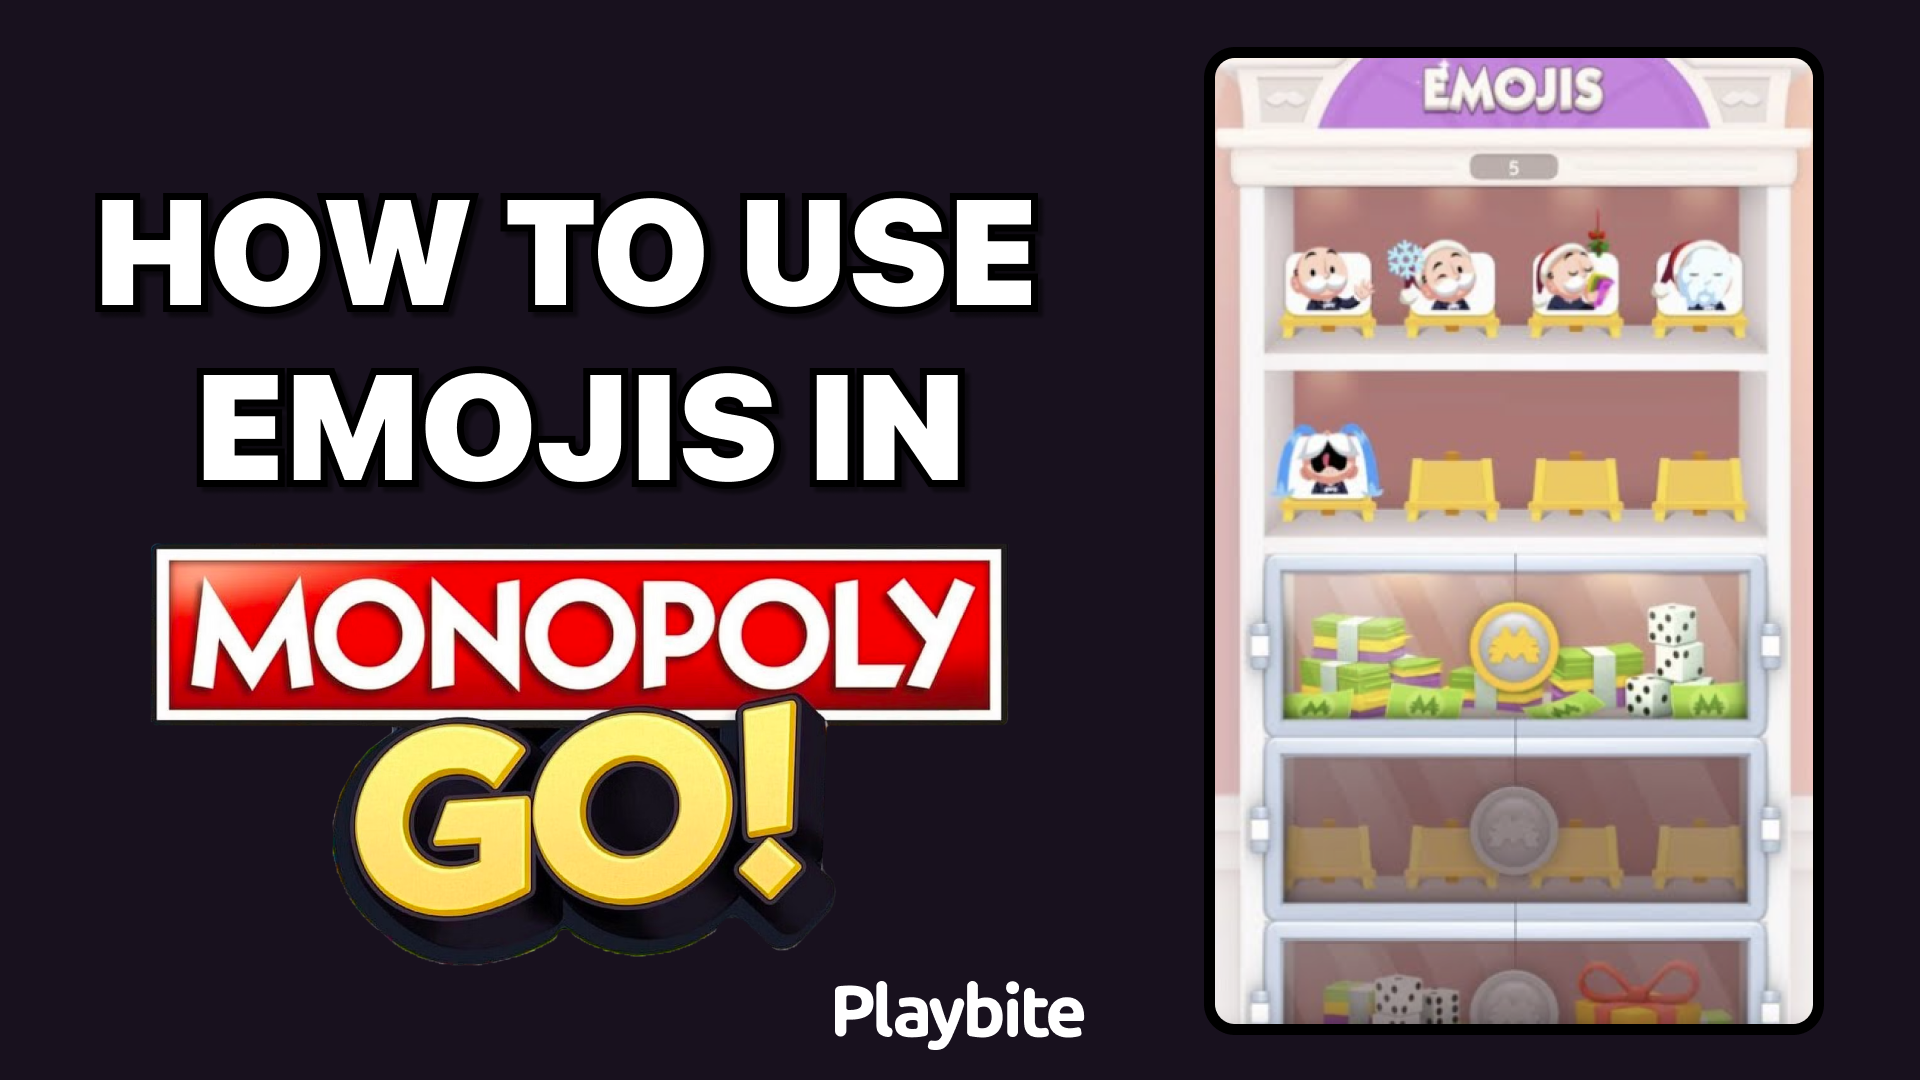 How To Use Emojis In Monopoly GO!